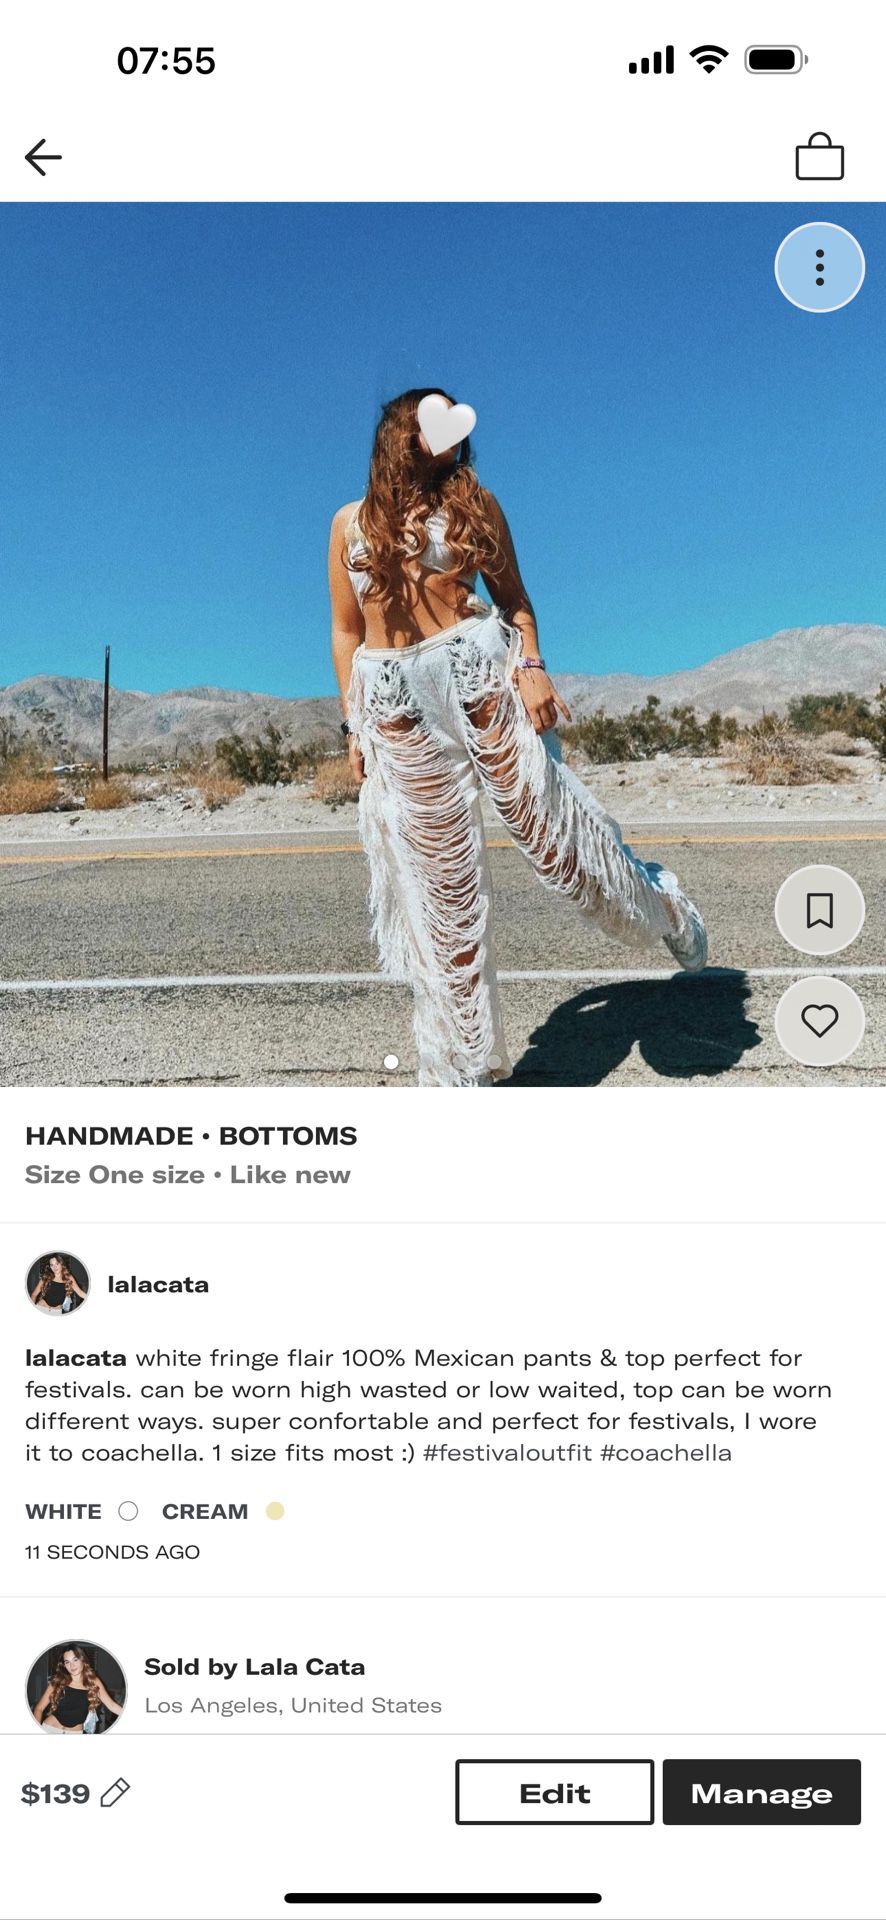 white fringe flair 100% Mexican pants & top set